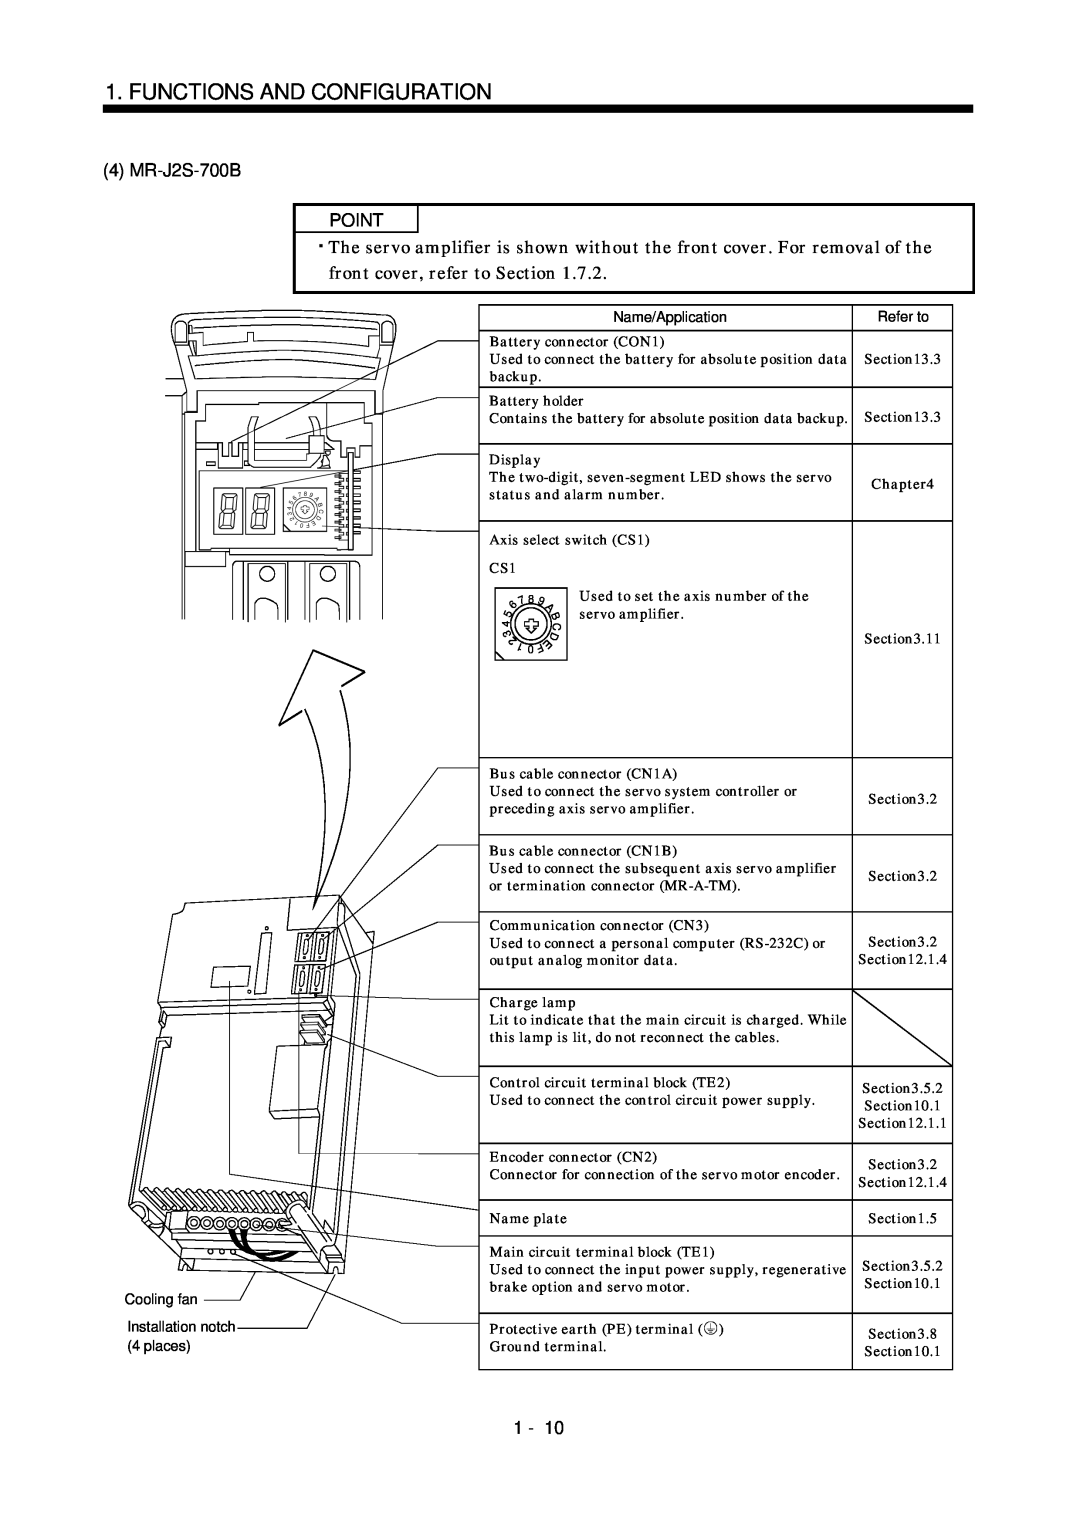 Bose MR-J2S- B instruction manual MR-J2S-700B, Point, Functions And Configuration 